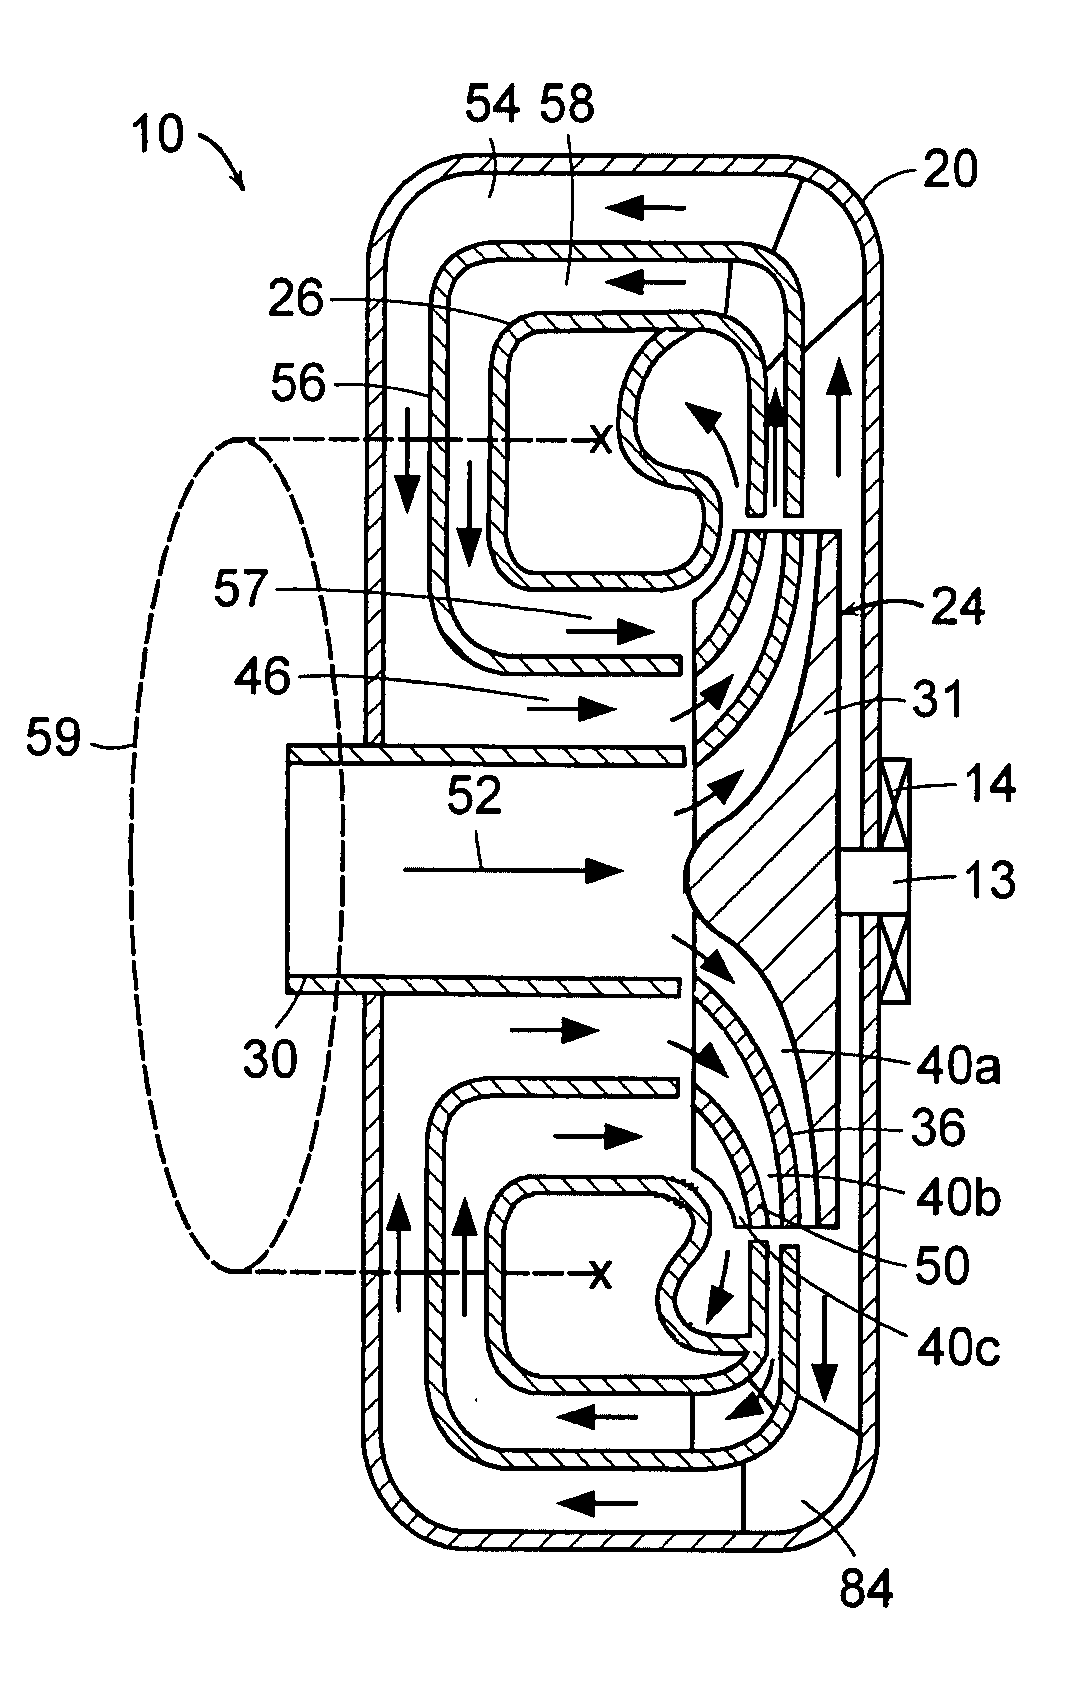 Fluid transfer controllers having a rotor assembly with multiple sets of rotor blades arranged in proximity and about the same hub component and further having barrier components configured to form passages for routing fluid through the multiple sets of rotor blades